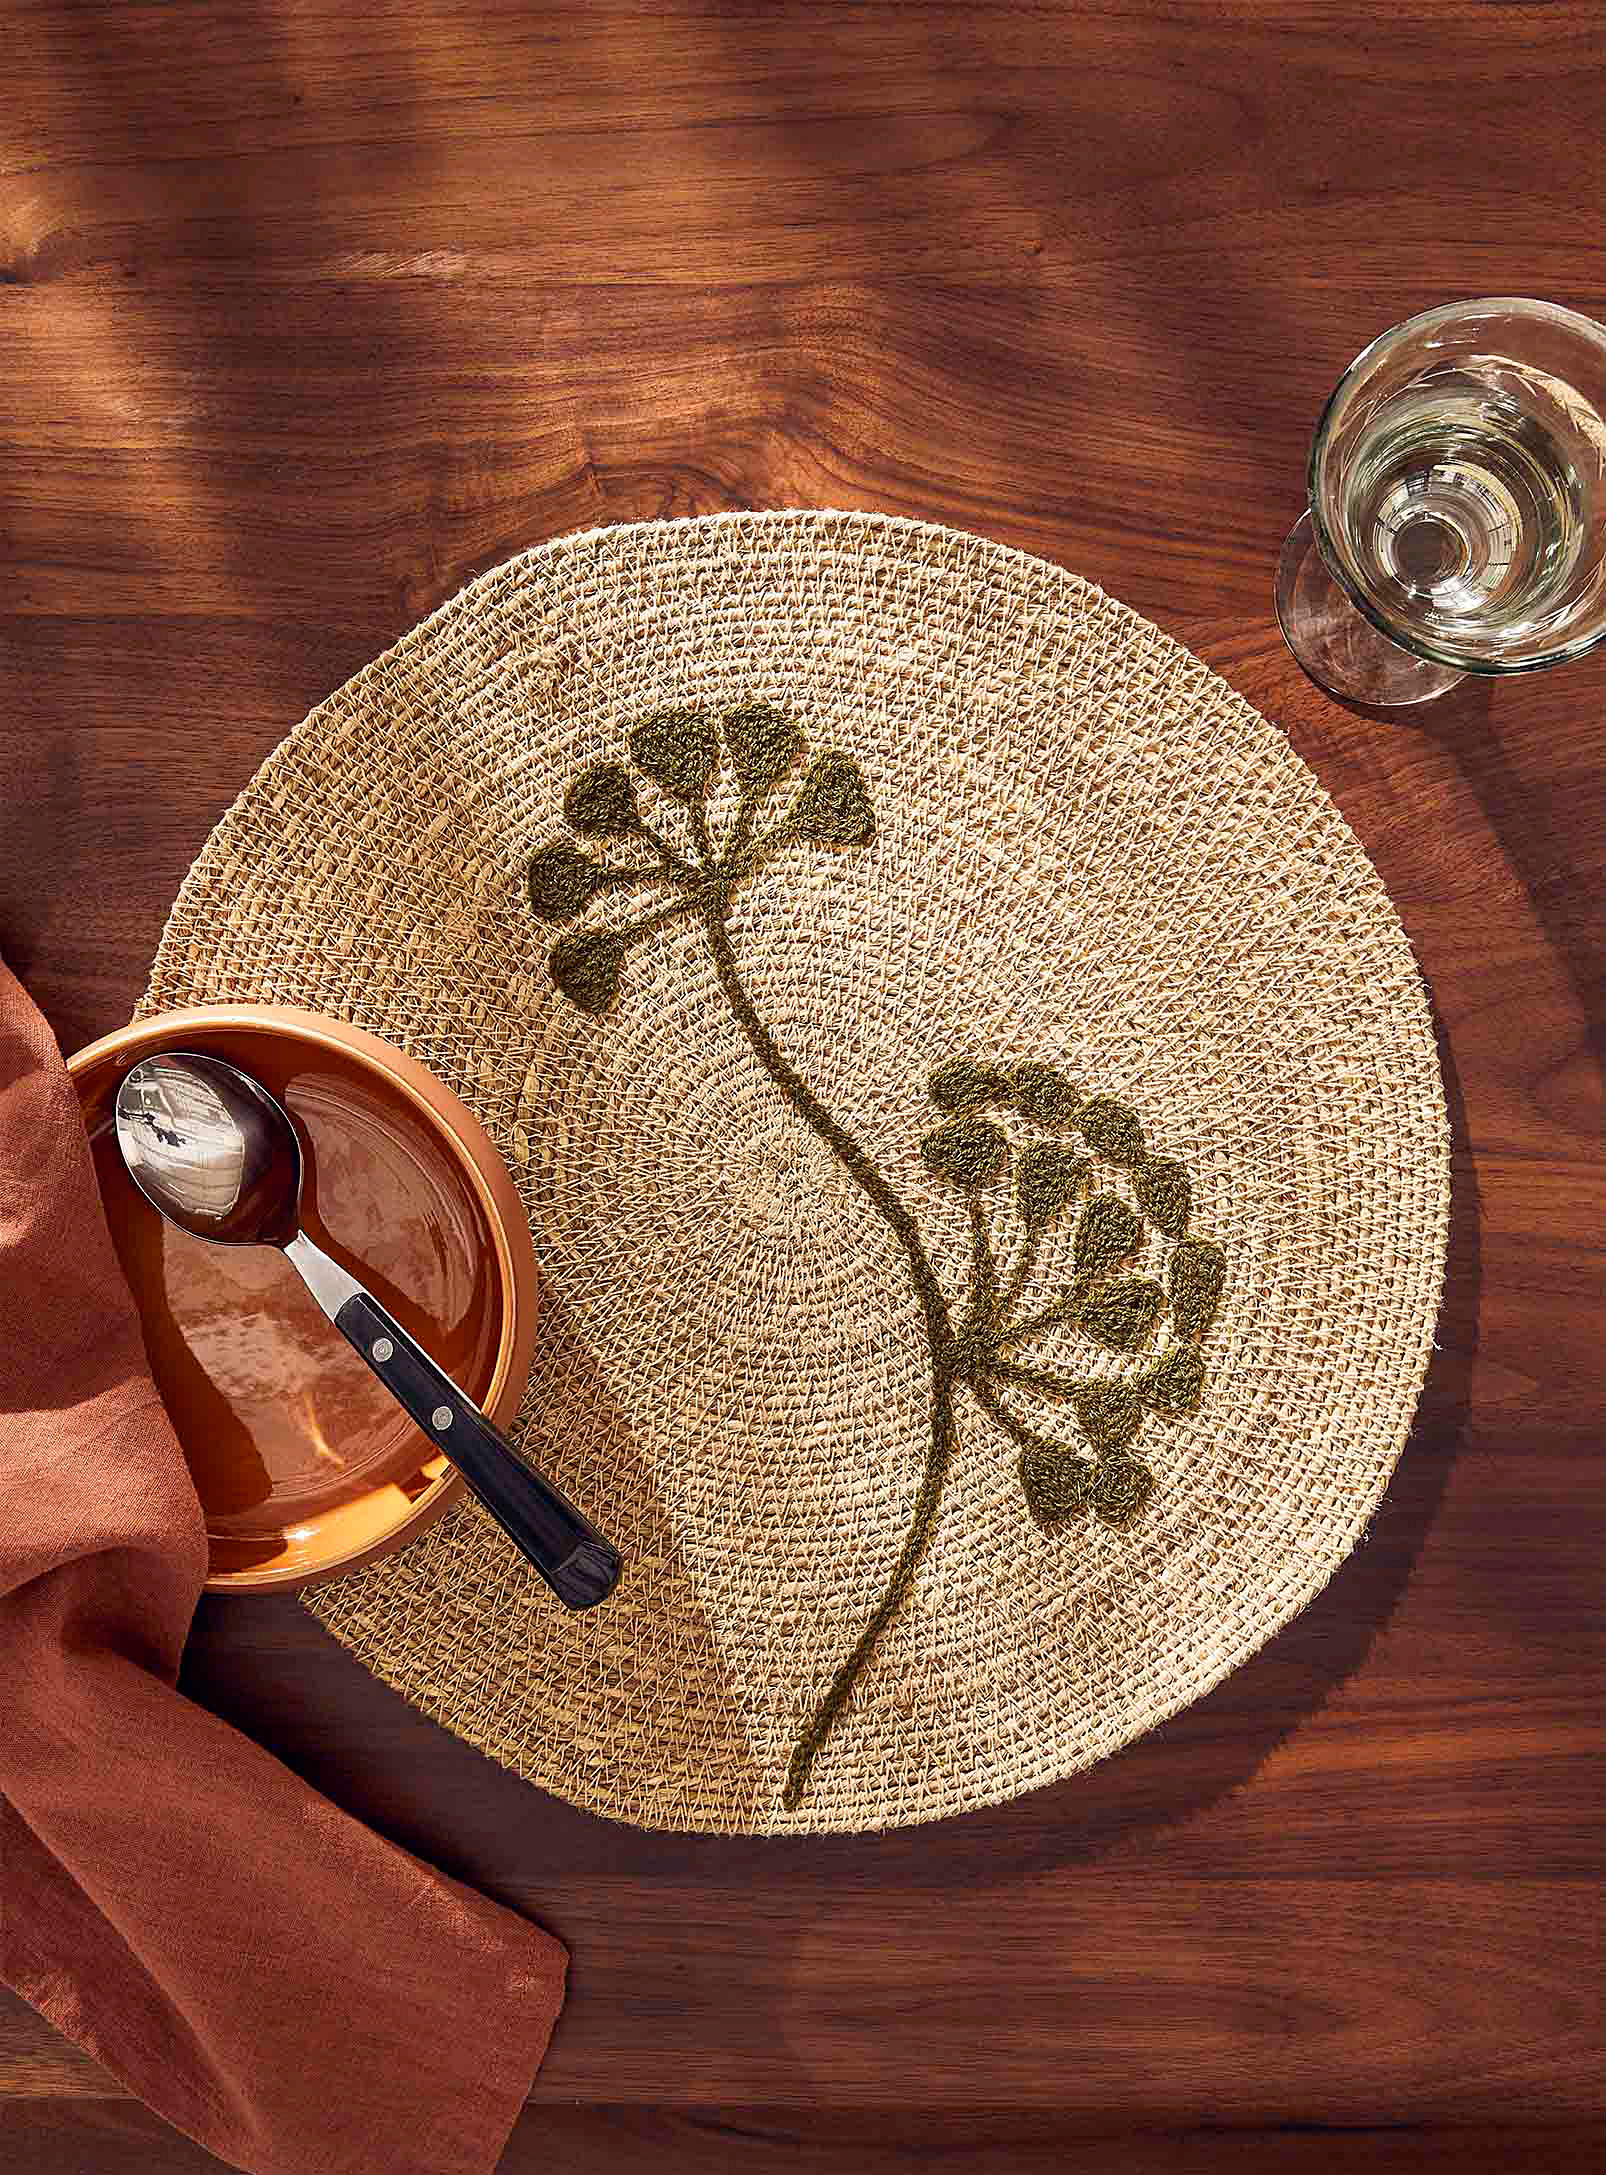 Danica Accent Flower Seagrass Placemat In Patterned Ecru